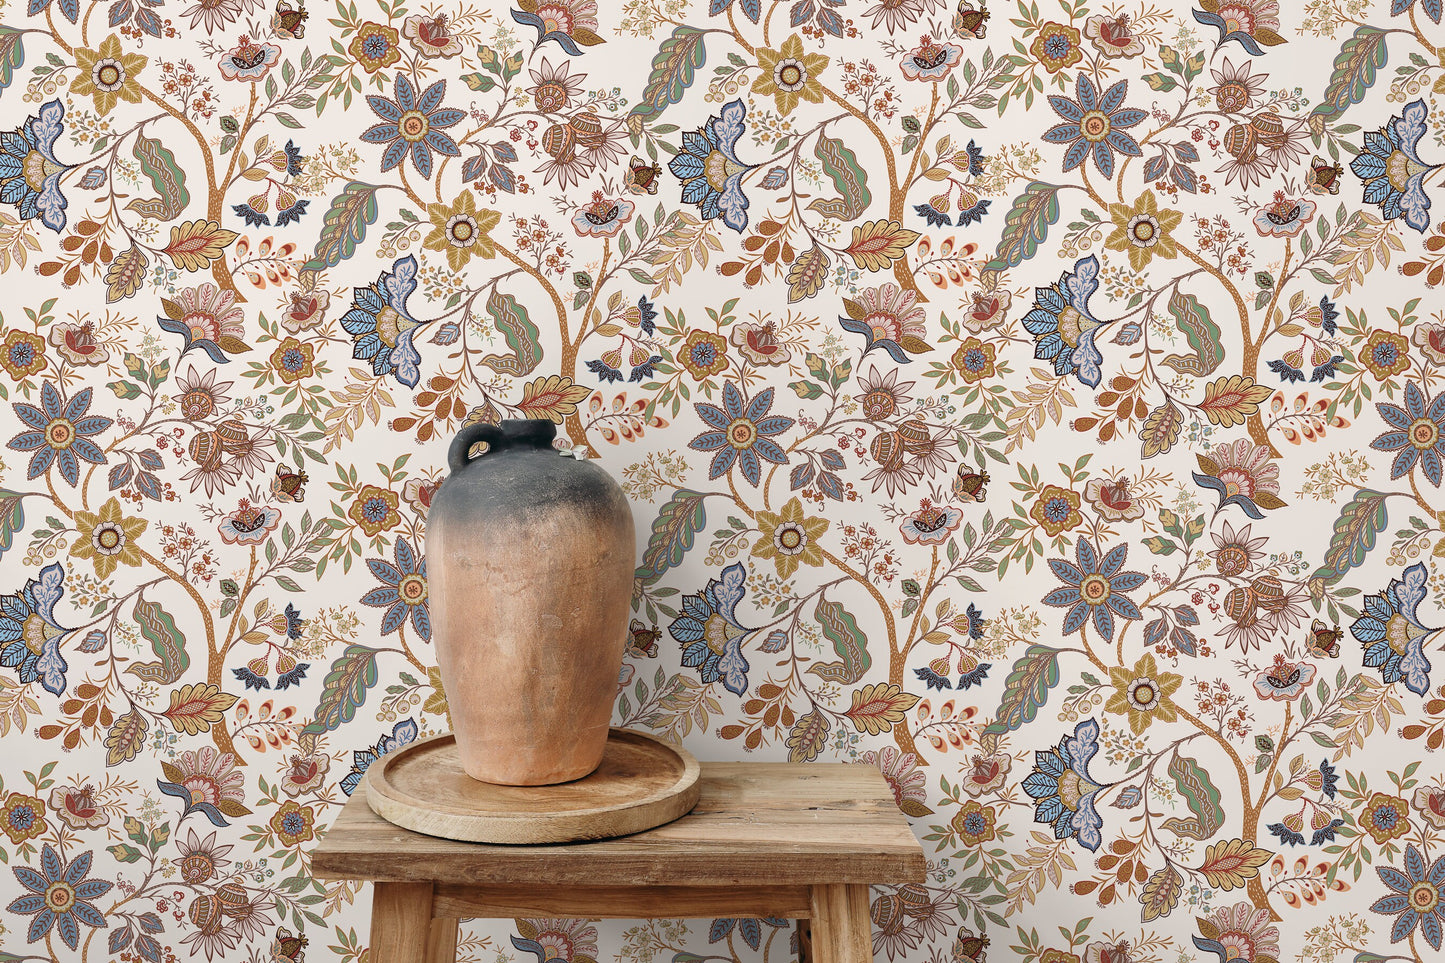 Taupe Chintz Floral Wallpaper / Peel and Stick Wallpaper Removable Wallpaper Home Decor Wall Art Wall Decor Room Decor - D385